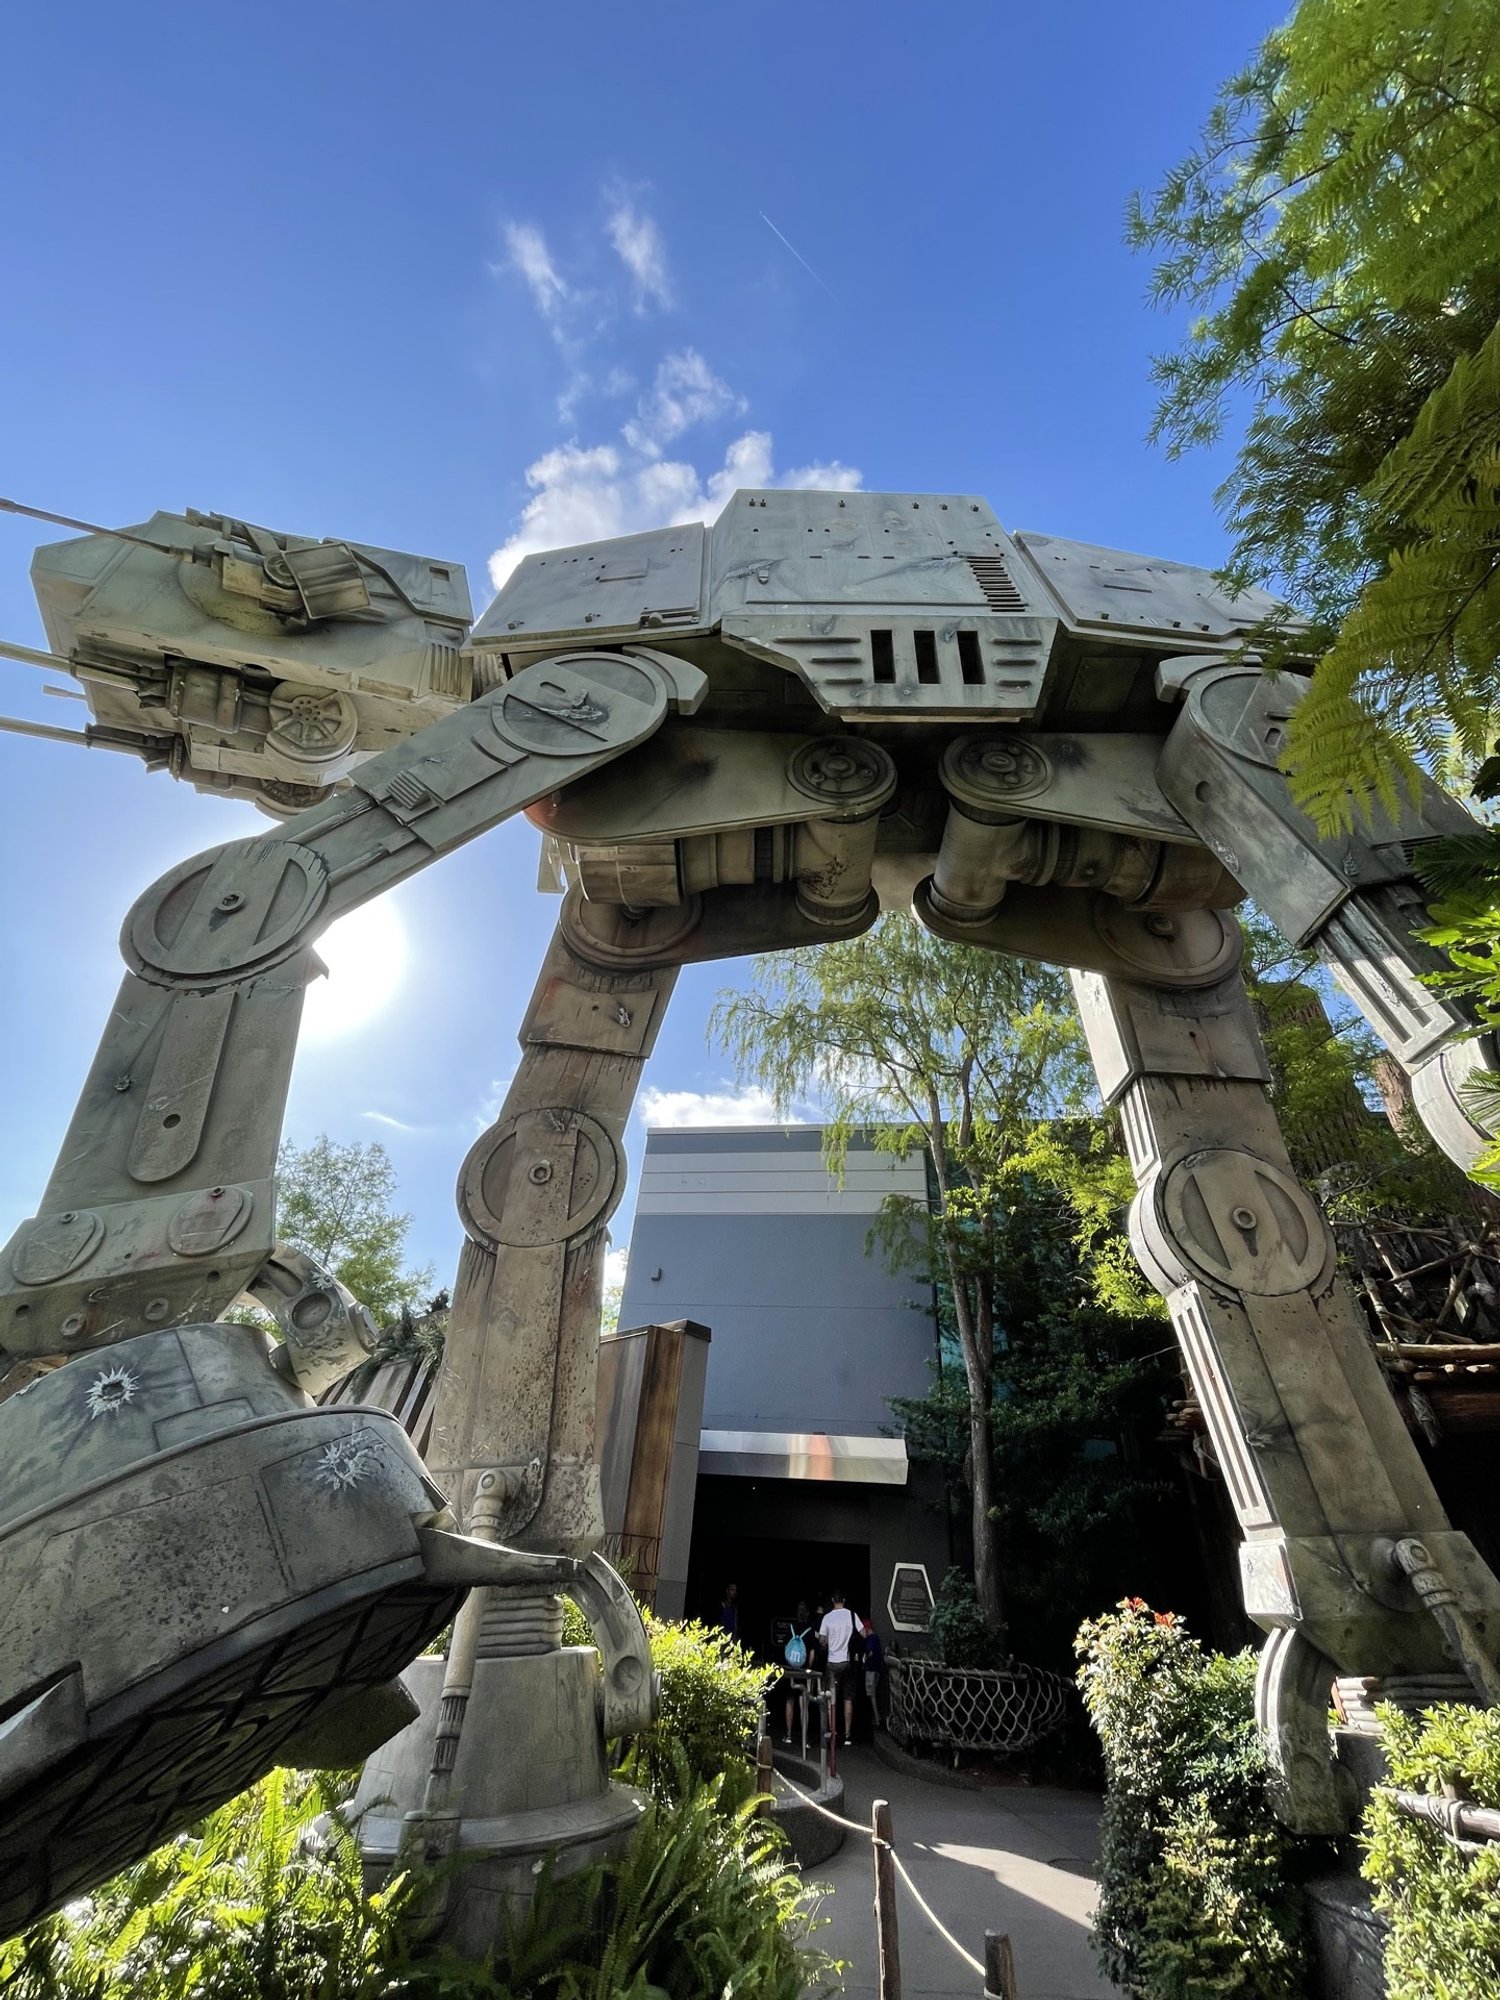 hollywood star tours